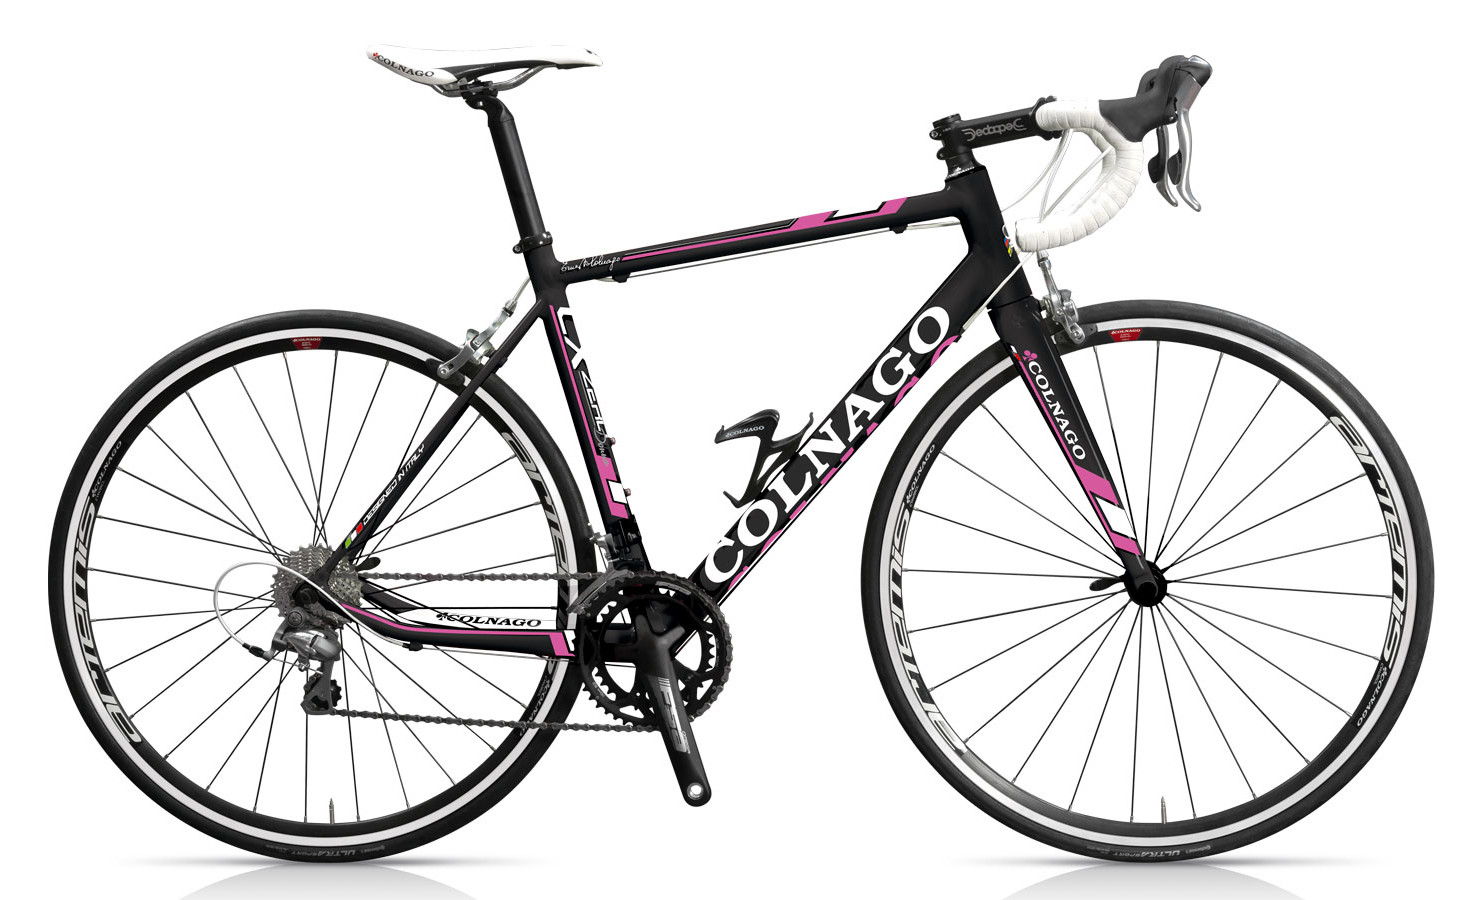 Colnago CX Alu Donna women-specific geometry bike Shimano 105 for guided road bike tours and rentals in Victoria BC Canada